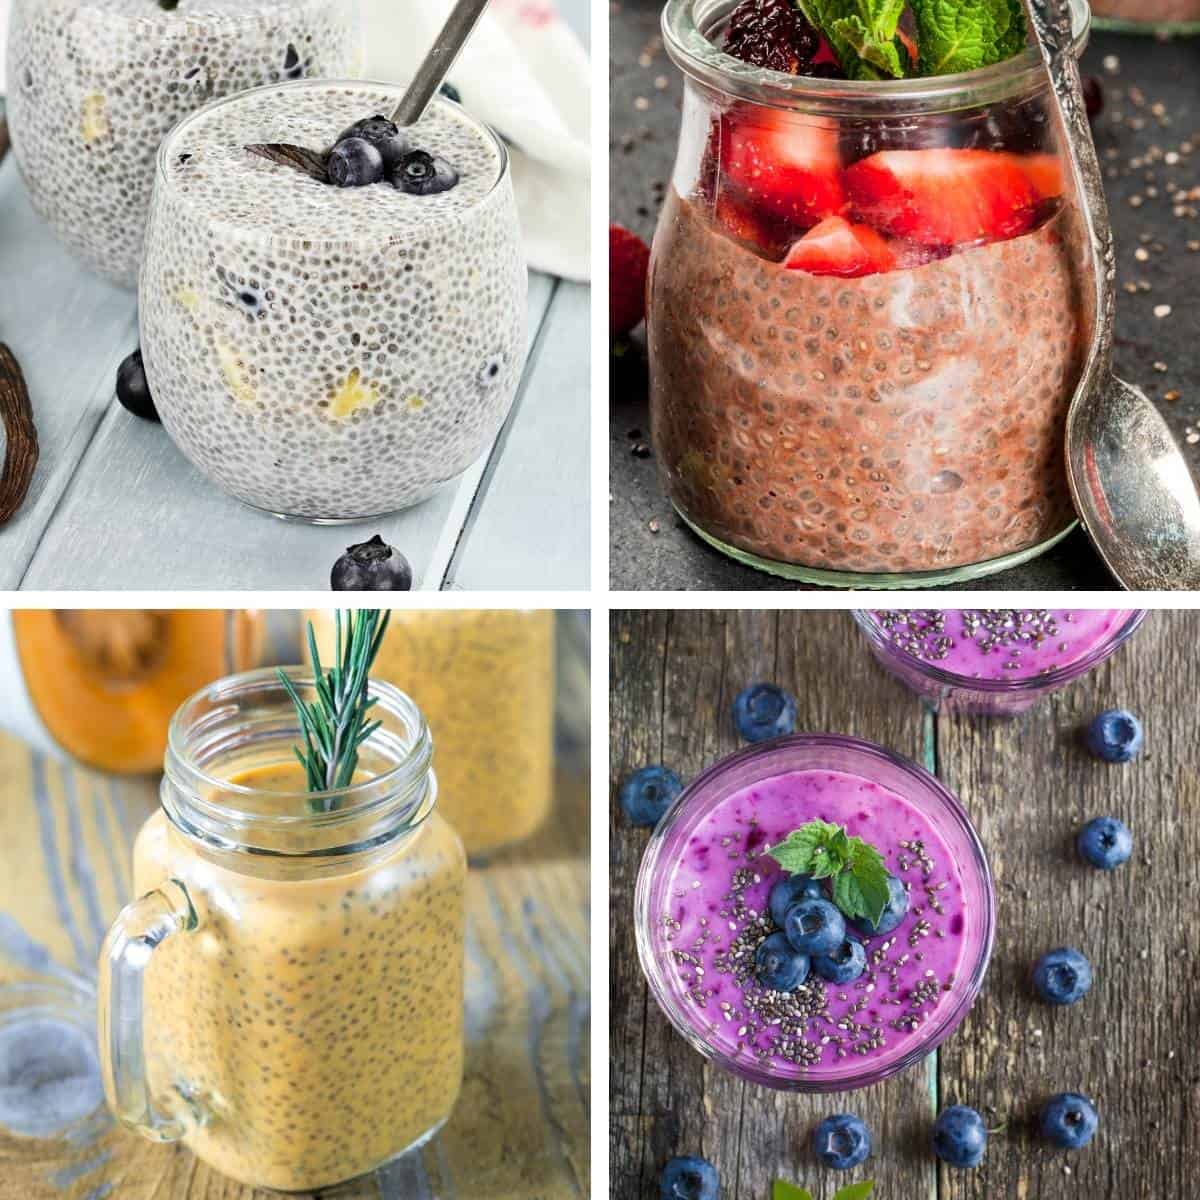 https://thinlicious.com/wp-content/uploads/2020/11/Low-carb-chia-breakfast-4-ways-Featured-Image-.jpg